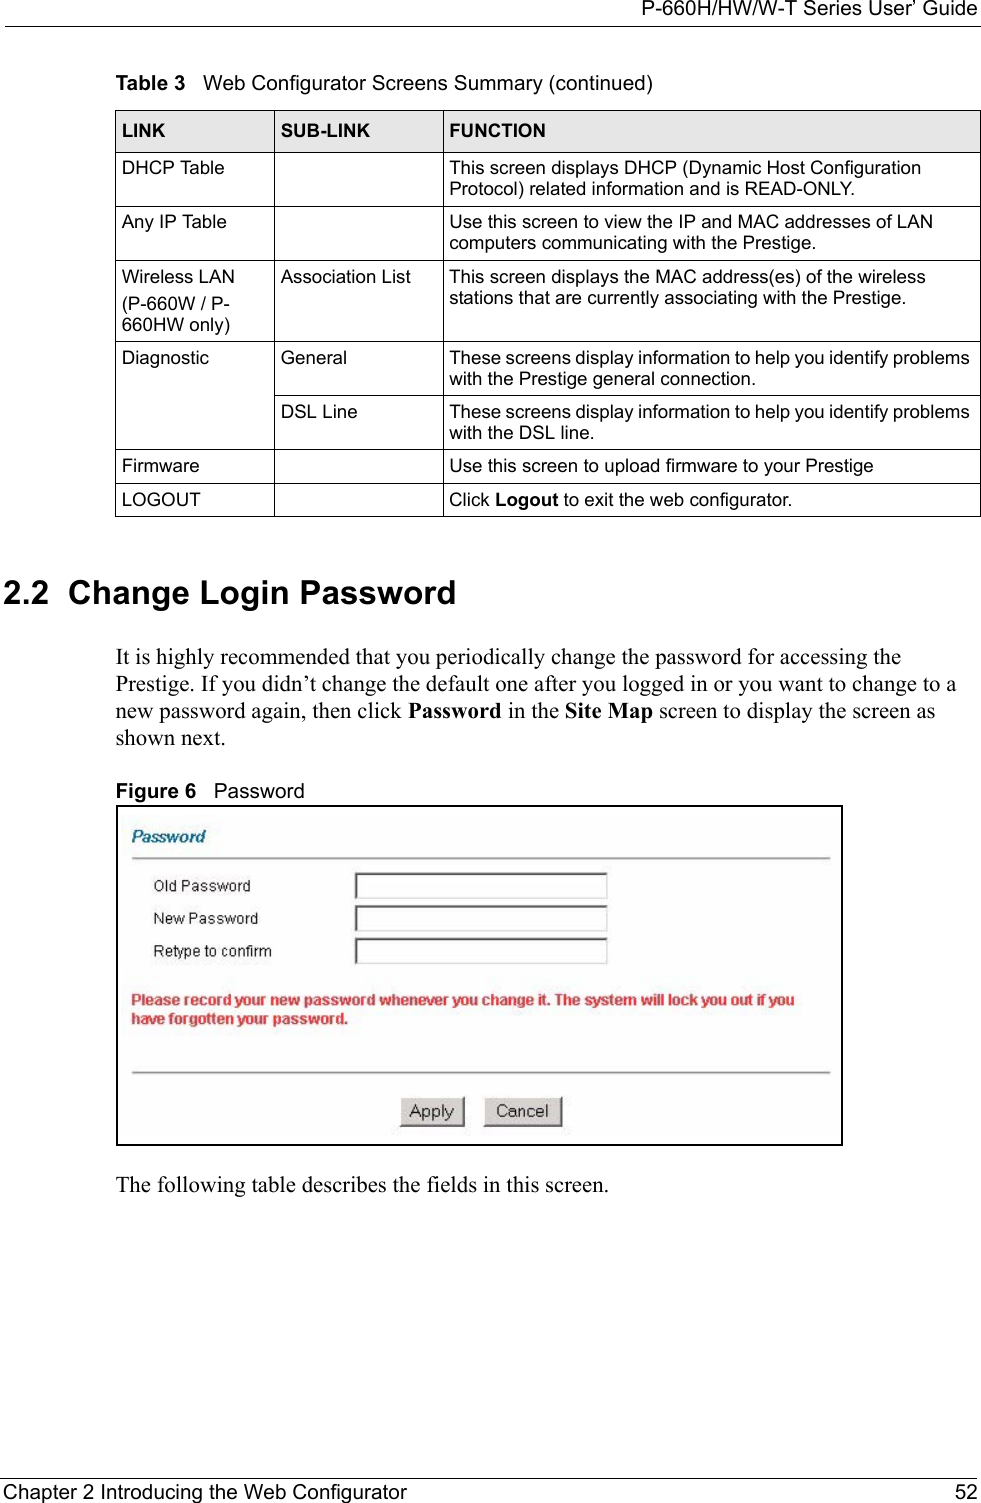 P-660H/HW/W-T Series User’ GuideChapter 2 Introducing the Web Configurator 522.2  Change Login Password It is highly recommended that you periodically change the password for accessing the Prestige. If you didn’t change the default one after you logged in or you want to change to a new password again, then click Password in the Site Map screen to display the screen as shown next. Figure 6   PasswordThe following table describes the fields in this screen.DHCP Table This screen displays DHCP (Dynamic Host Configuration Protocol) related information and is READ-ONLY.Any IP Table Use this screen to view the IP and MAC addresses of LAN computers communicating with the Prestige. Wireless LAN (P-660W / P-660HW only)Association List This screen displays the MAC address(es) of the wireless stations that are currently associating with the Prestige. Diagnostic General These screens display information to help you identify problems with the Prestige general connection.DSL Line These screens display information to help you identify problems with the DSL line.Firmware Use this screen to upload firmware to your PrestigeLOGOUT Click Logout to exit the web configurator.Table 3   Web Configurator Screens Summary (continued)LINK SUB-LINK FUNCTION